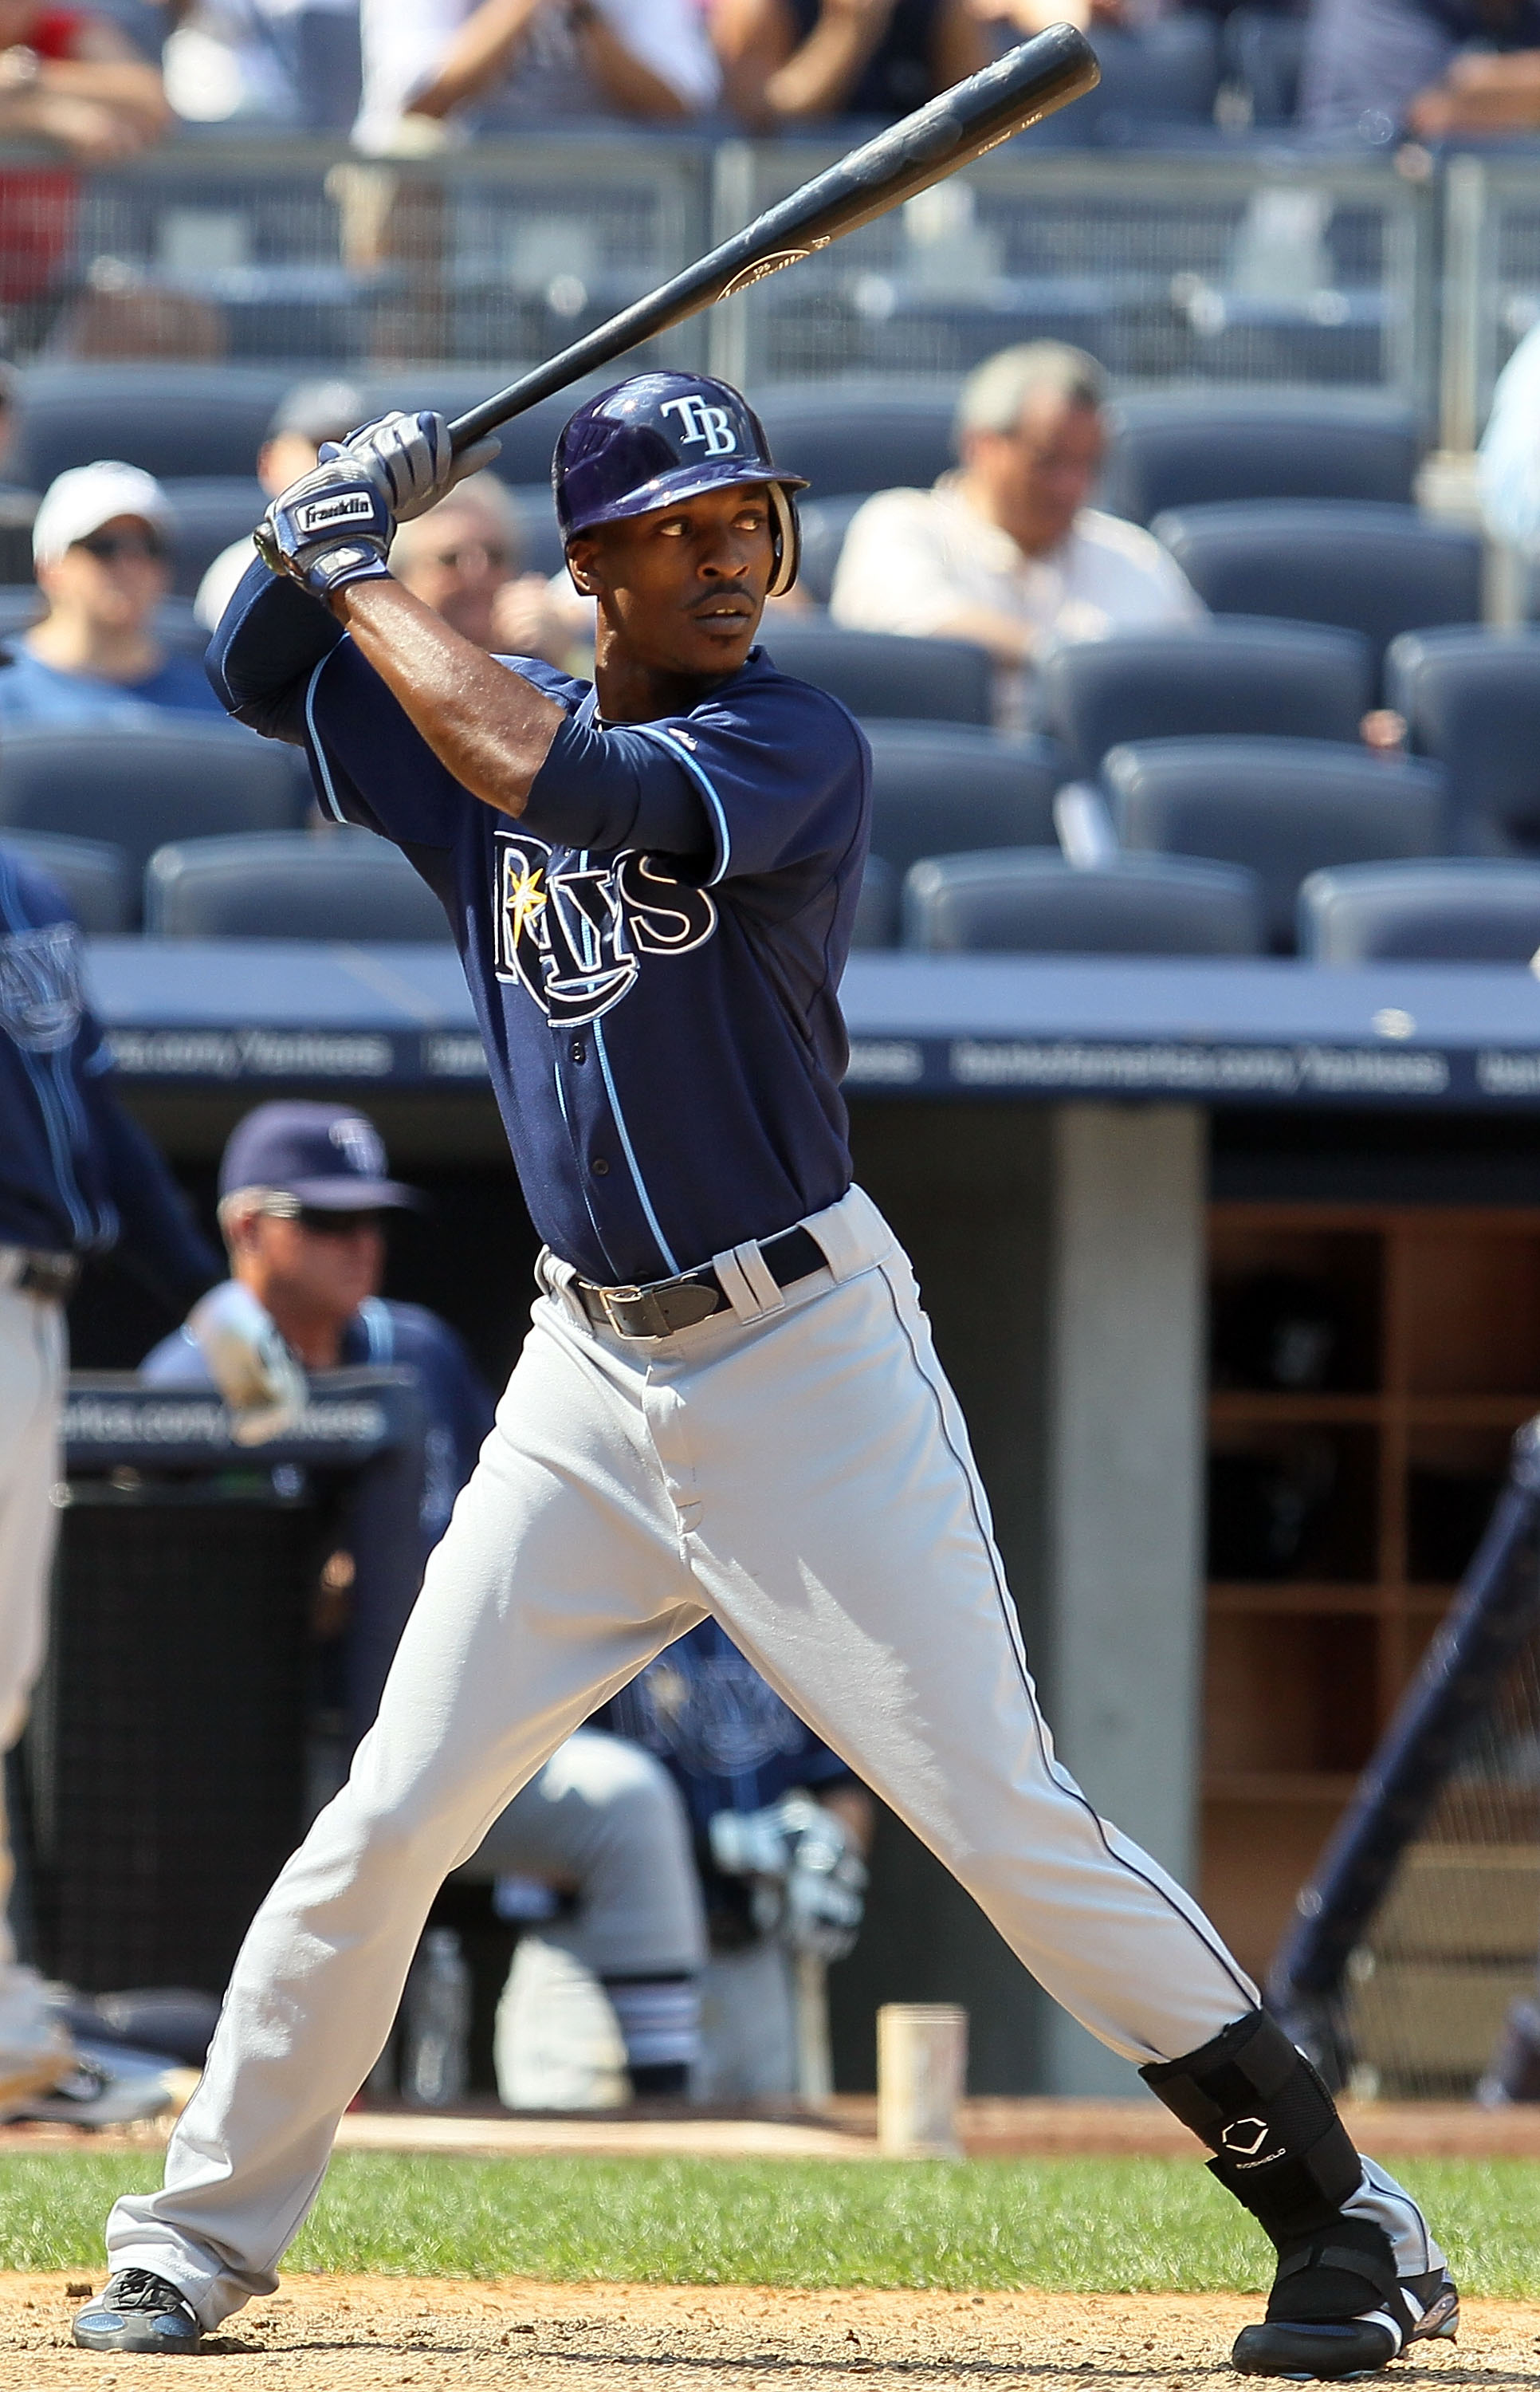 NEW YORK - JULY 18:  B.J. Upton #2 of the Tampa Bay Rays bats against the New York Yankees on July 18, 2010 at Yankee Stadium in the Bronx borough of New York City.  (Photo by Jim McIsaac/Getty Images)